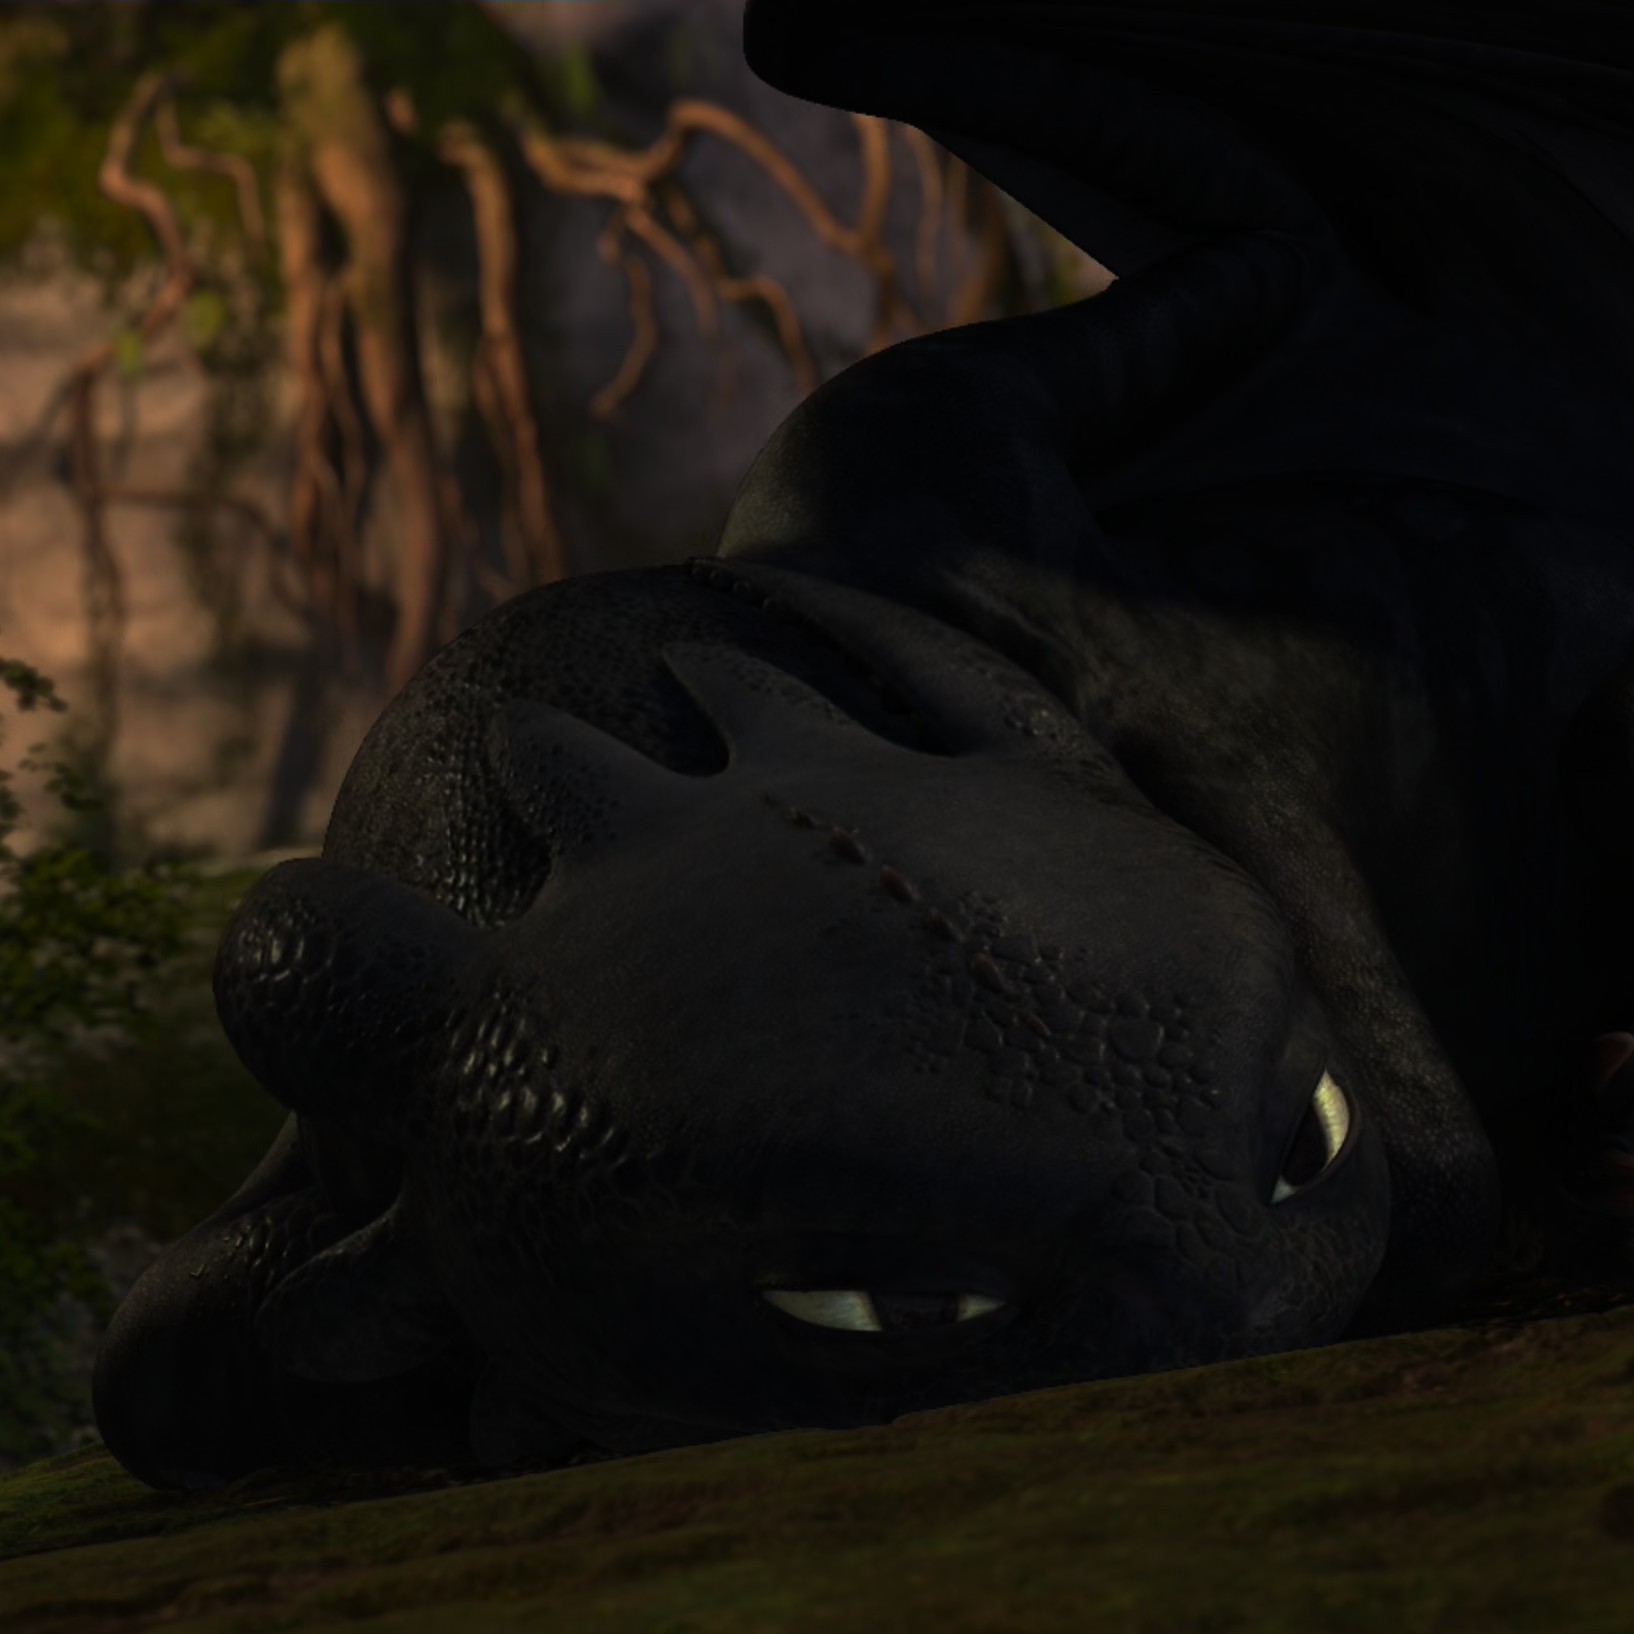 Toothless pic n°59